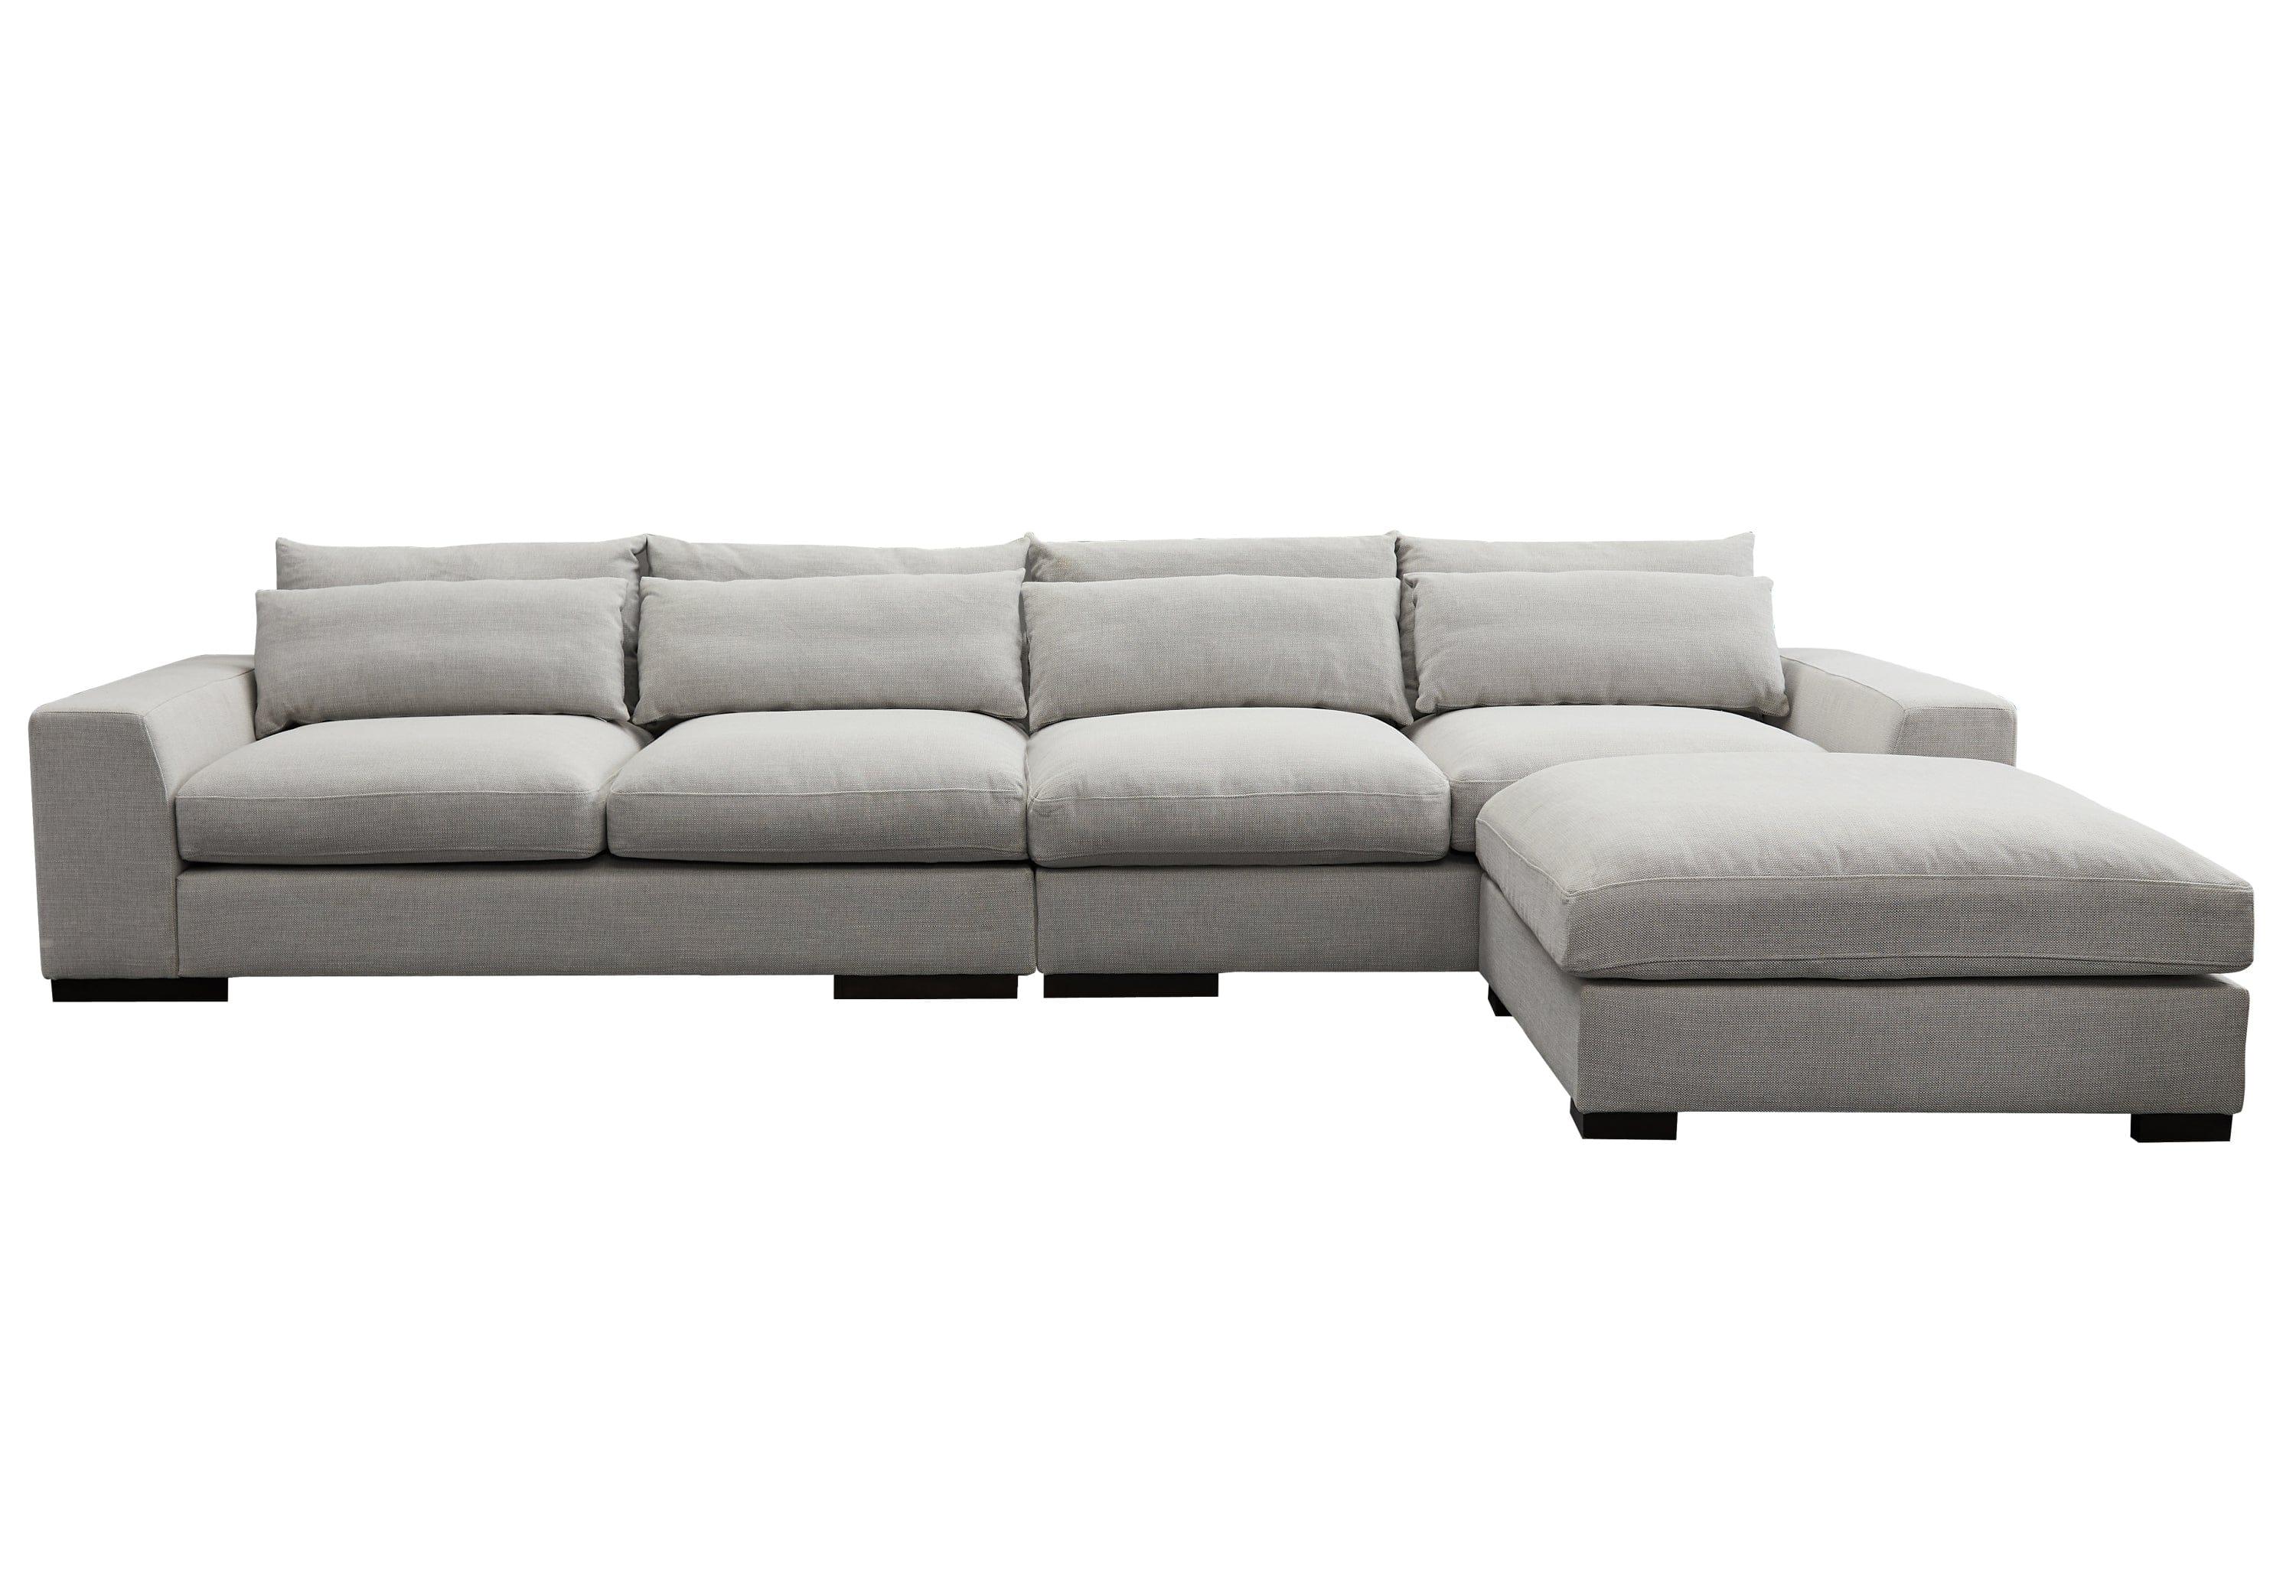 Shop SOFA AND COMFORTABLE SECTIONAL SOFA LIGHT GREY（same as W223S00105，W223S01523，W223S01525。Size difference, See Details in page.） Mademoiselle Home Decor